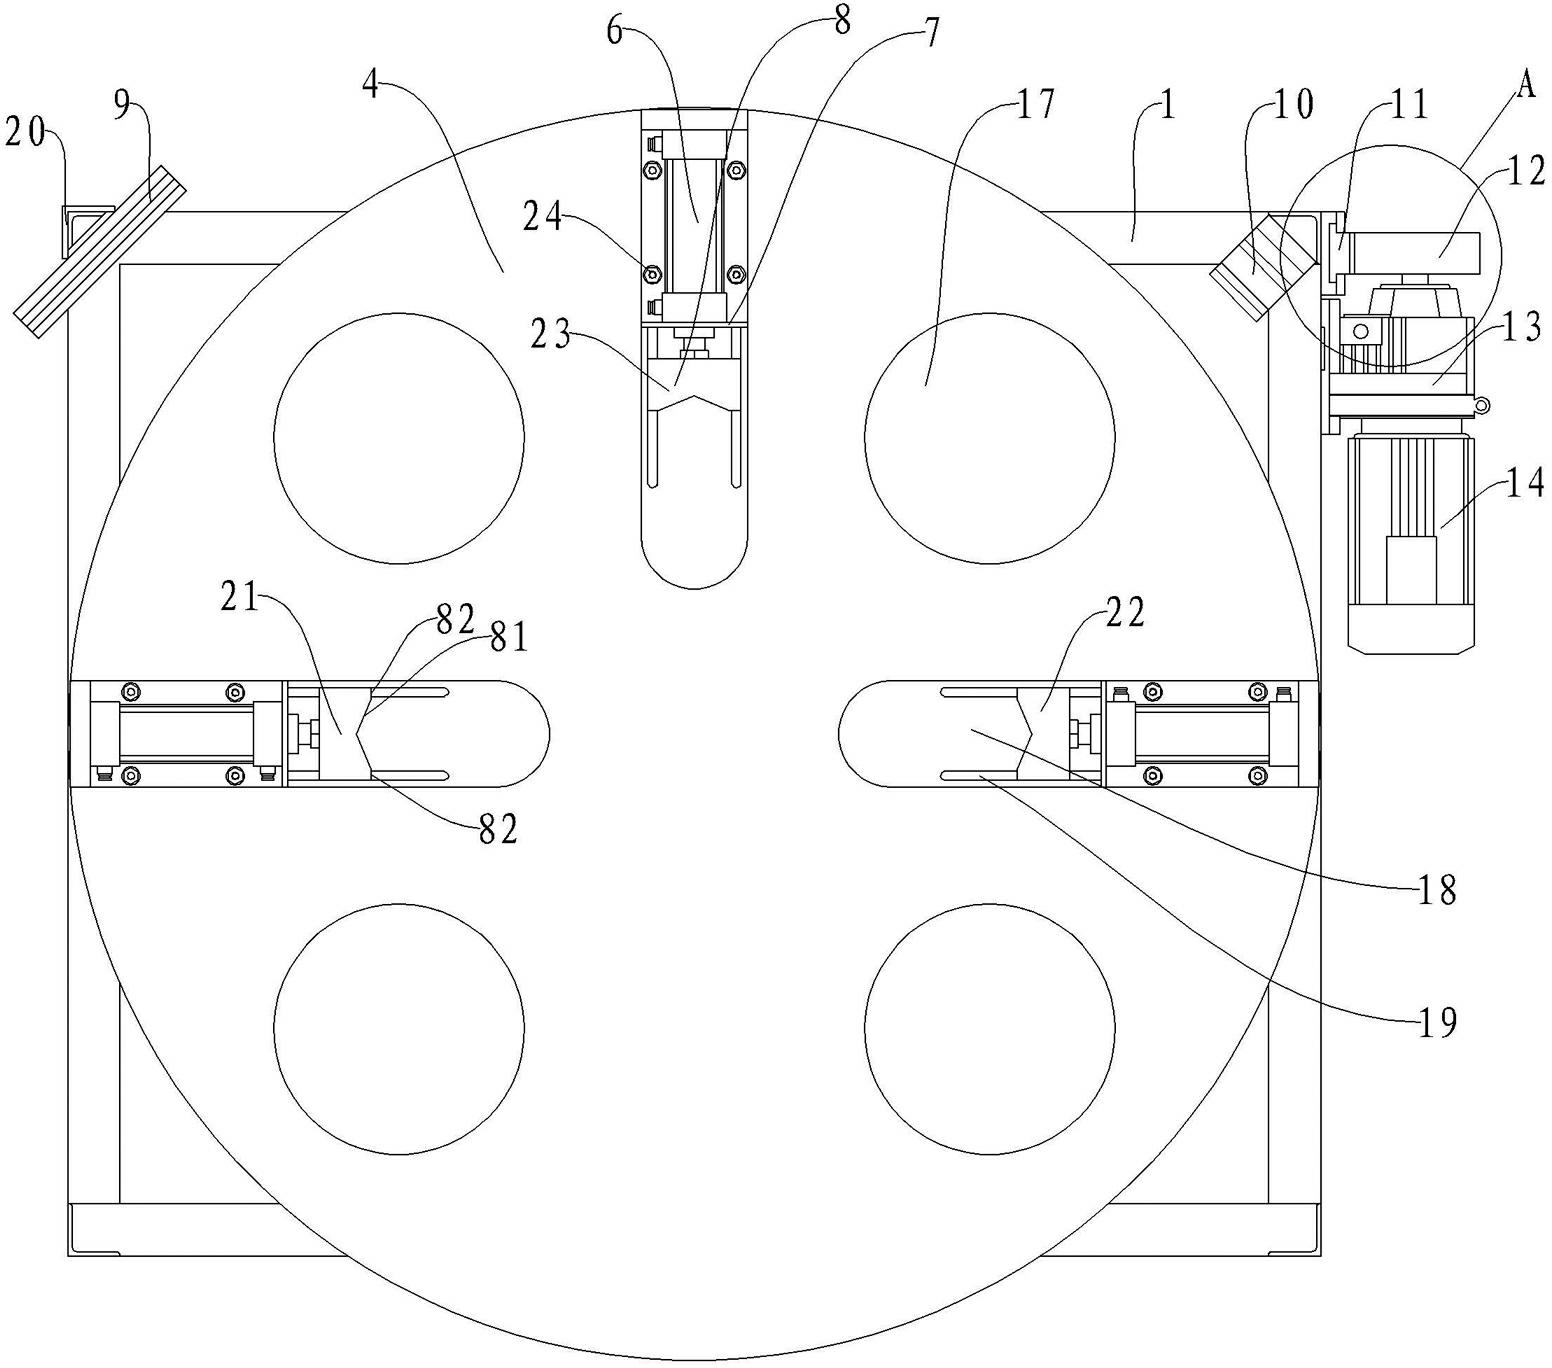 Visual worktable for workpiece conveying on catenary